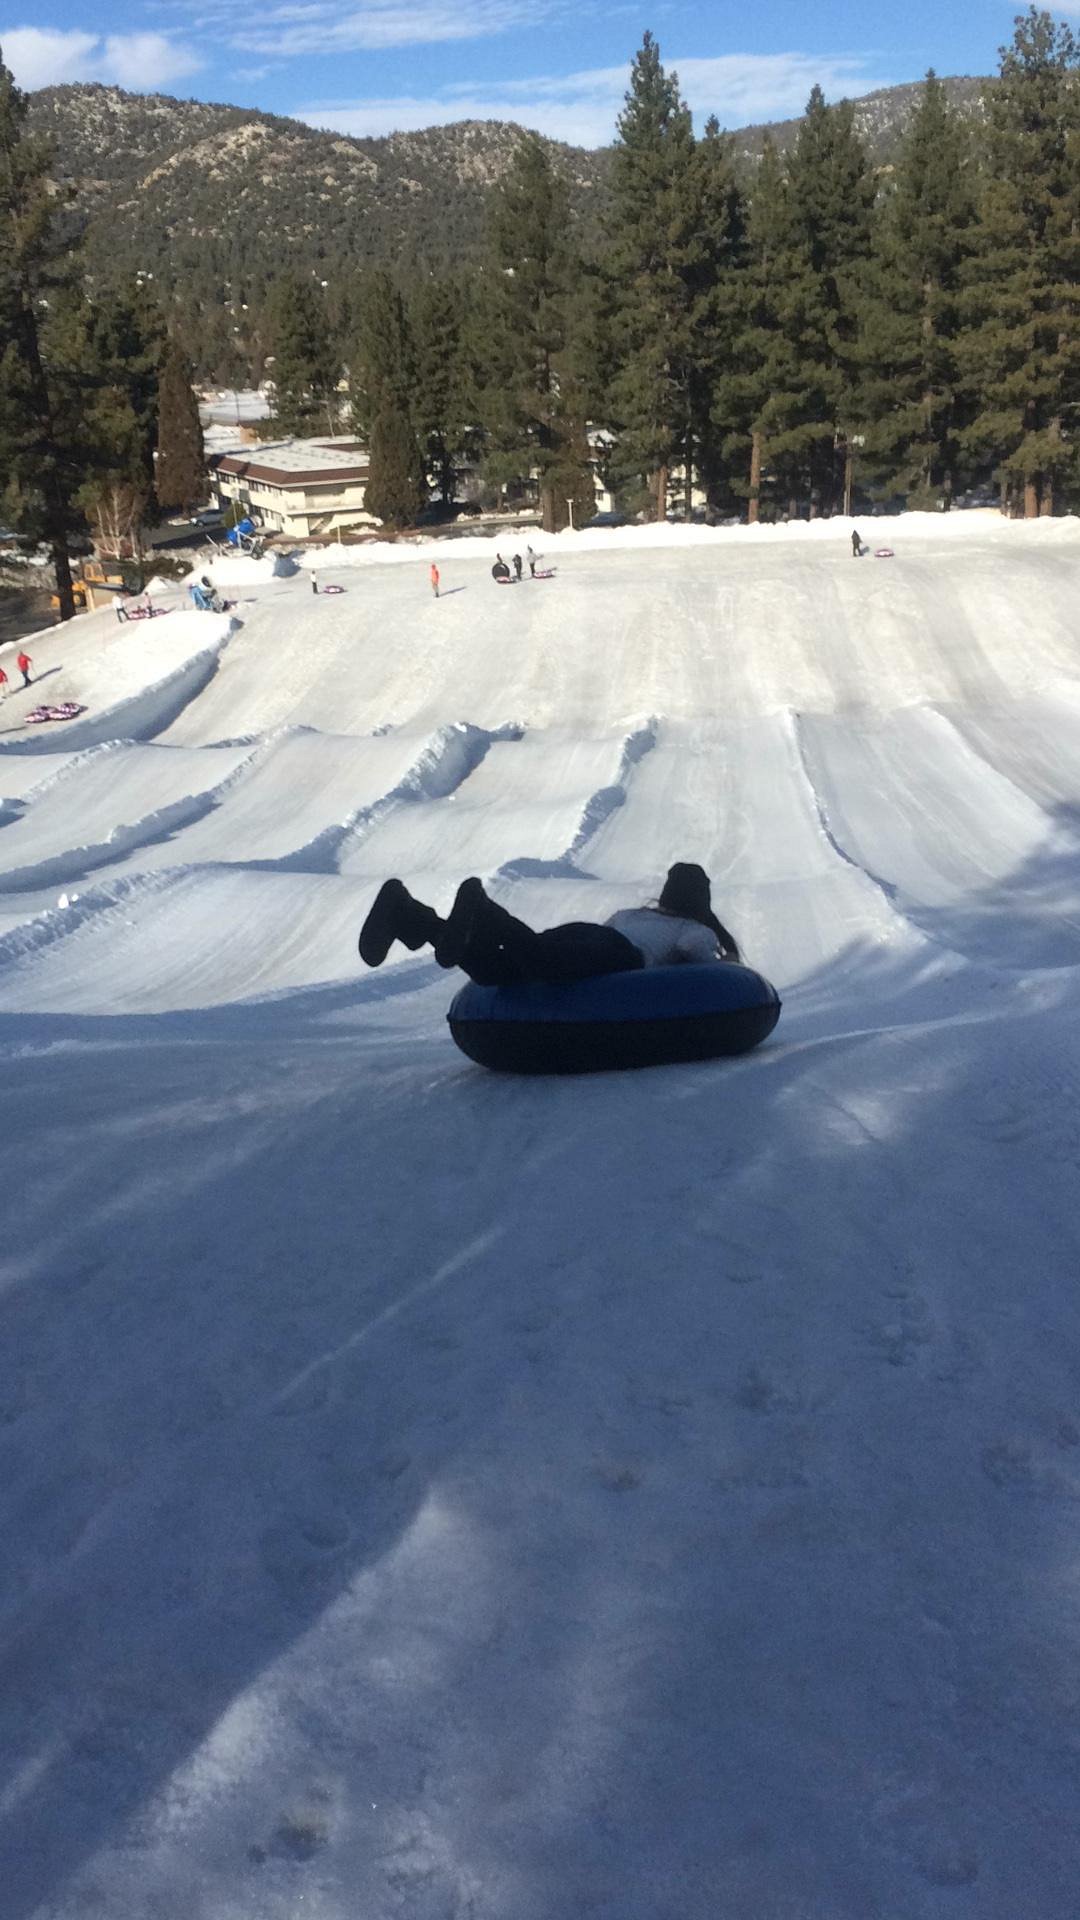 Big Bear Snow Play (Big Bear Lake) All Need to Know BEFORE You Go